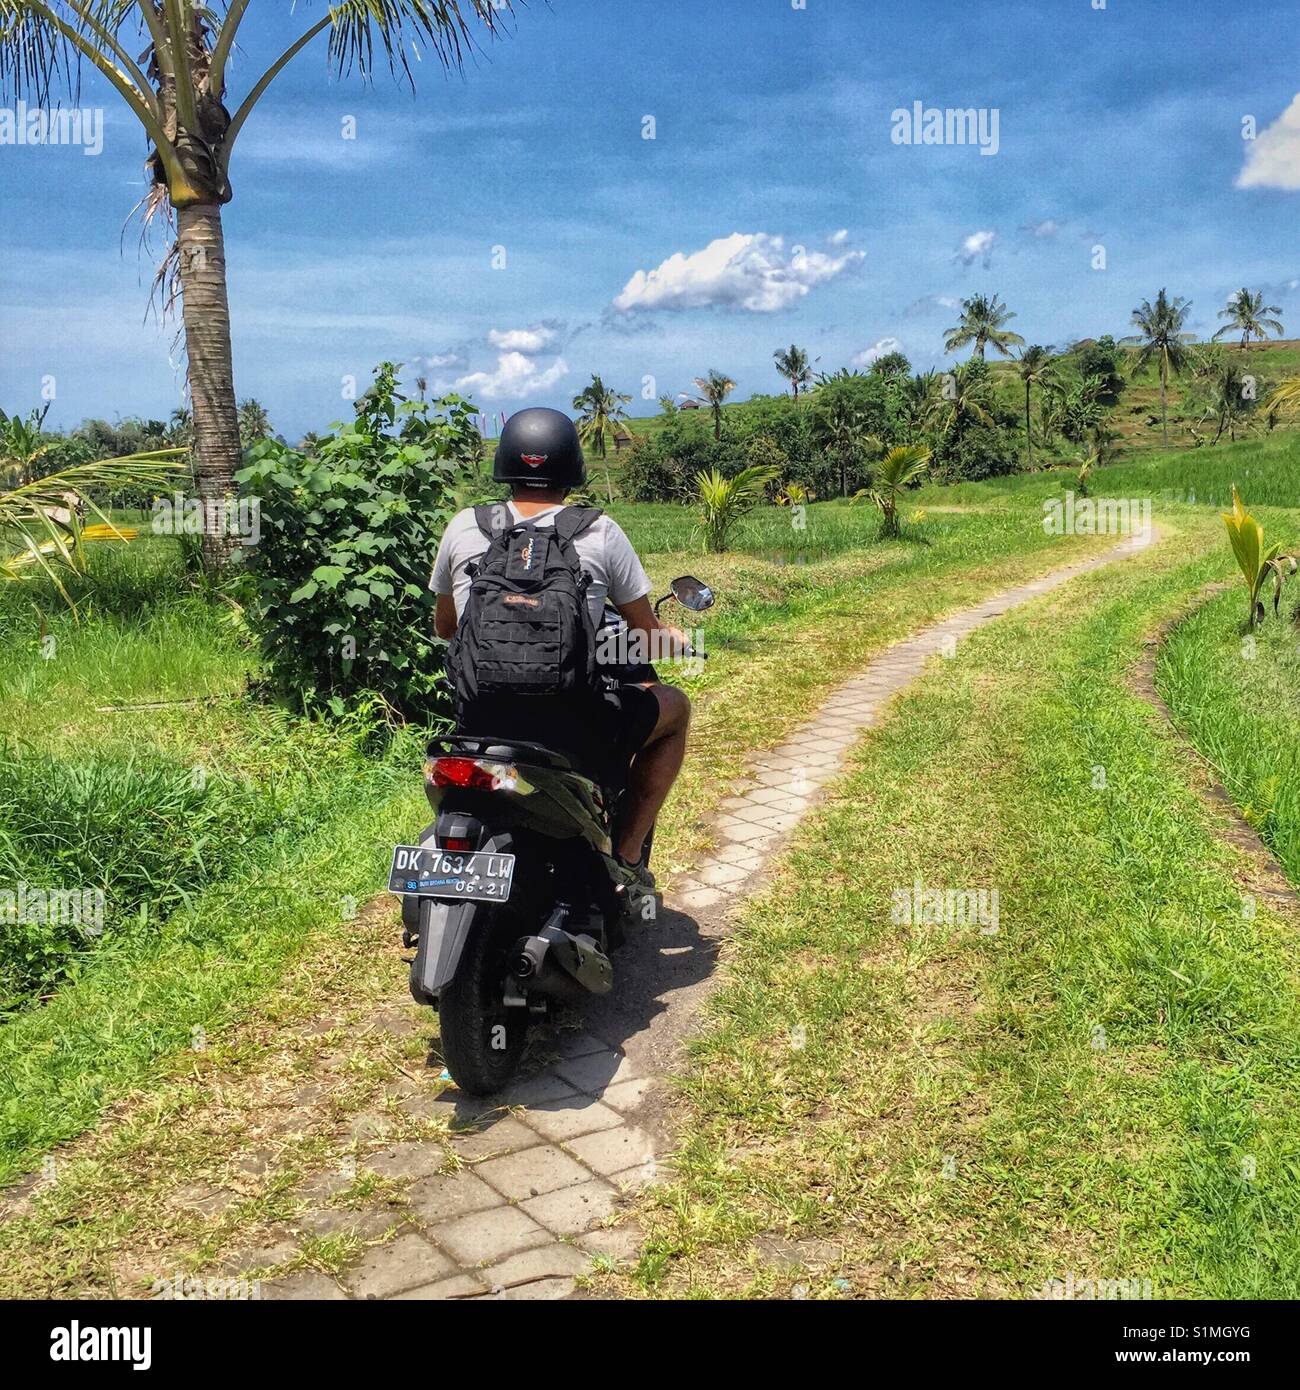 Rear view of motorbike and rider traveling through rural countryside in tropical Bali, Indonesia Stock Photo